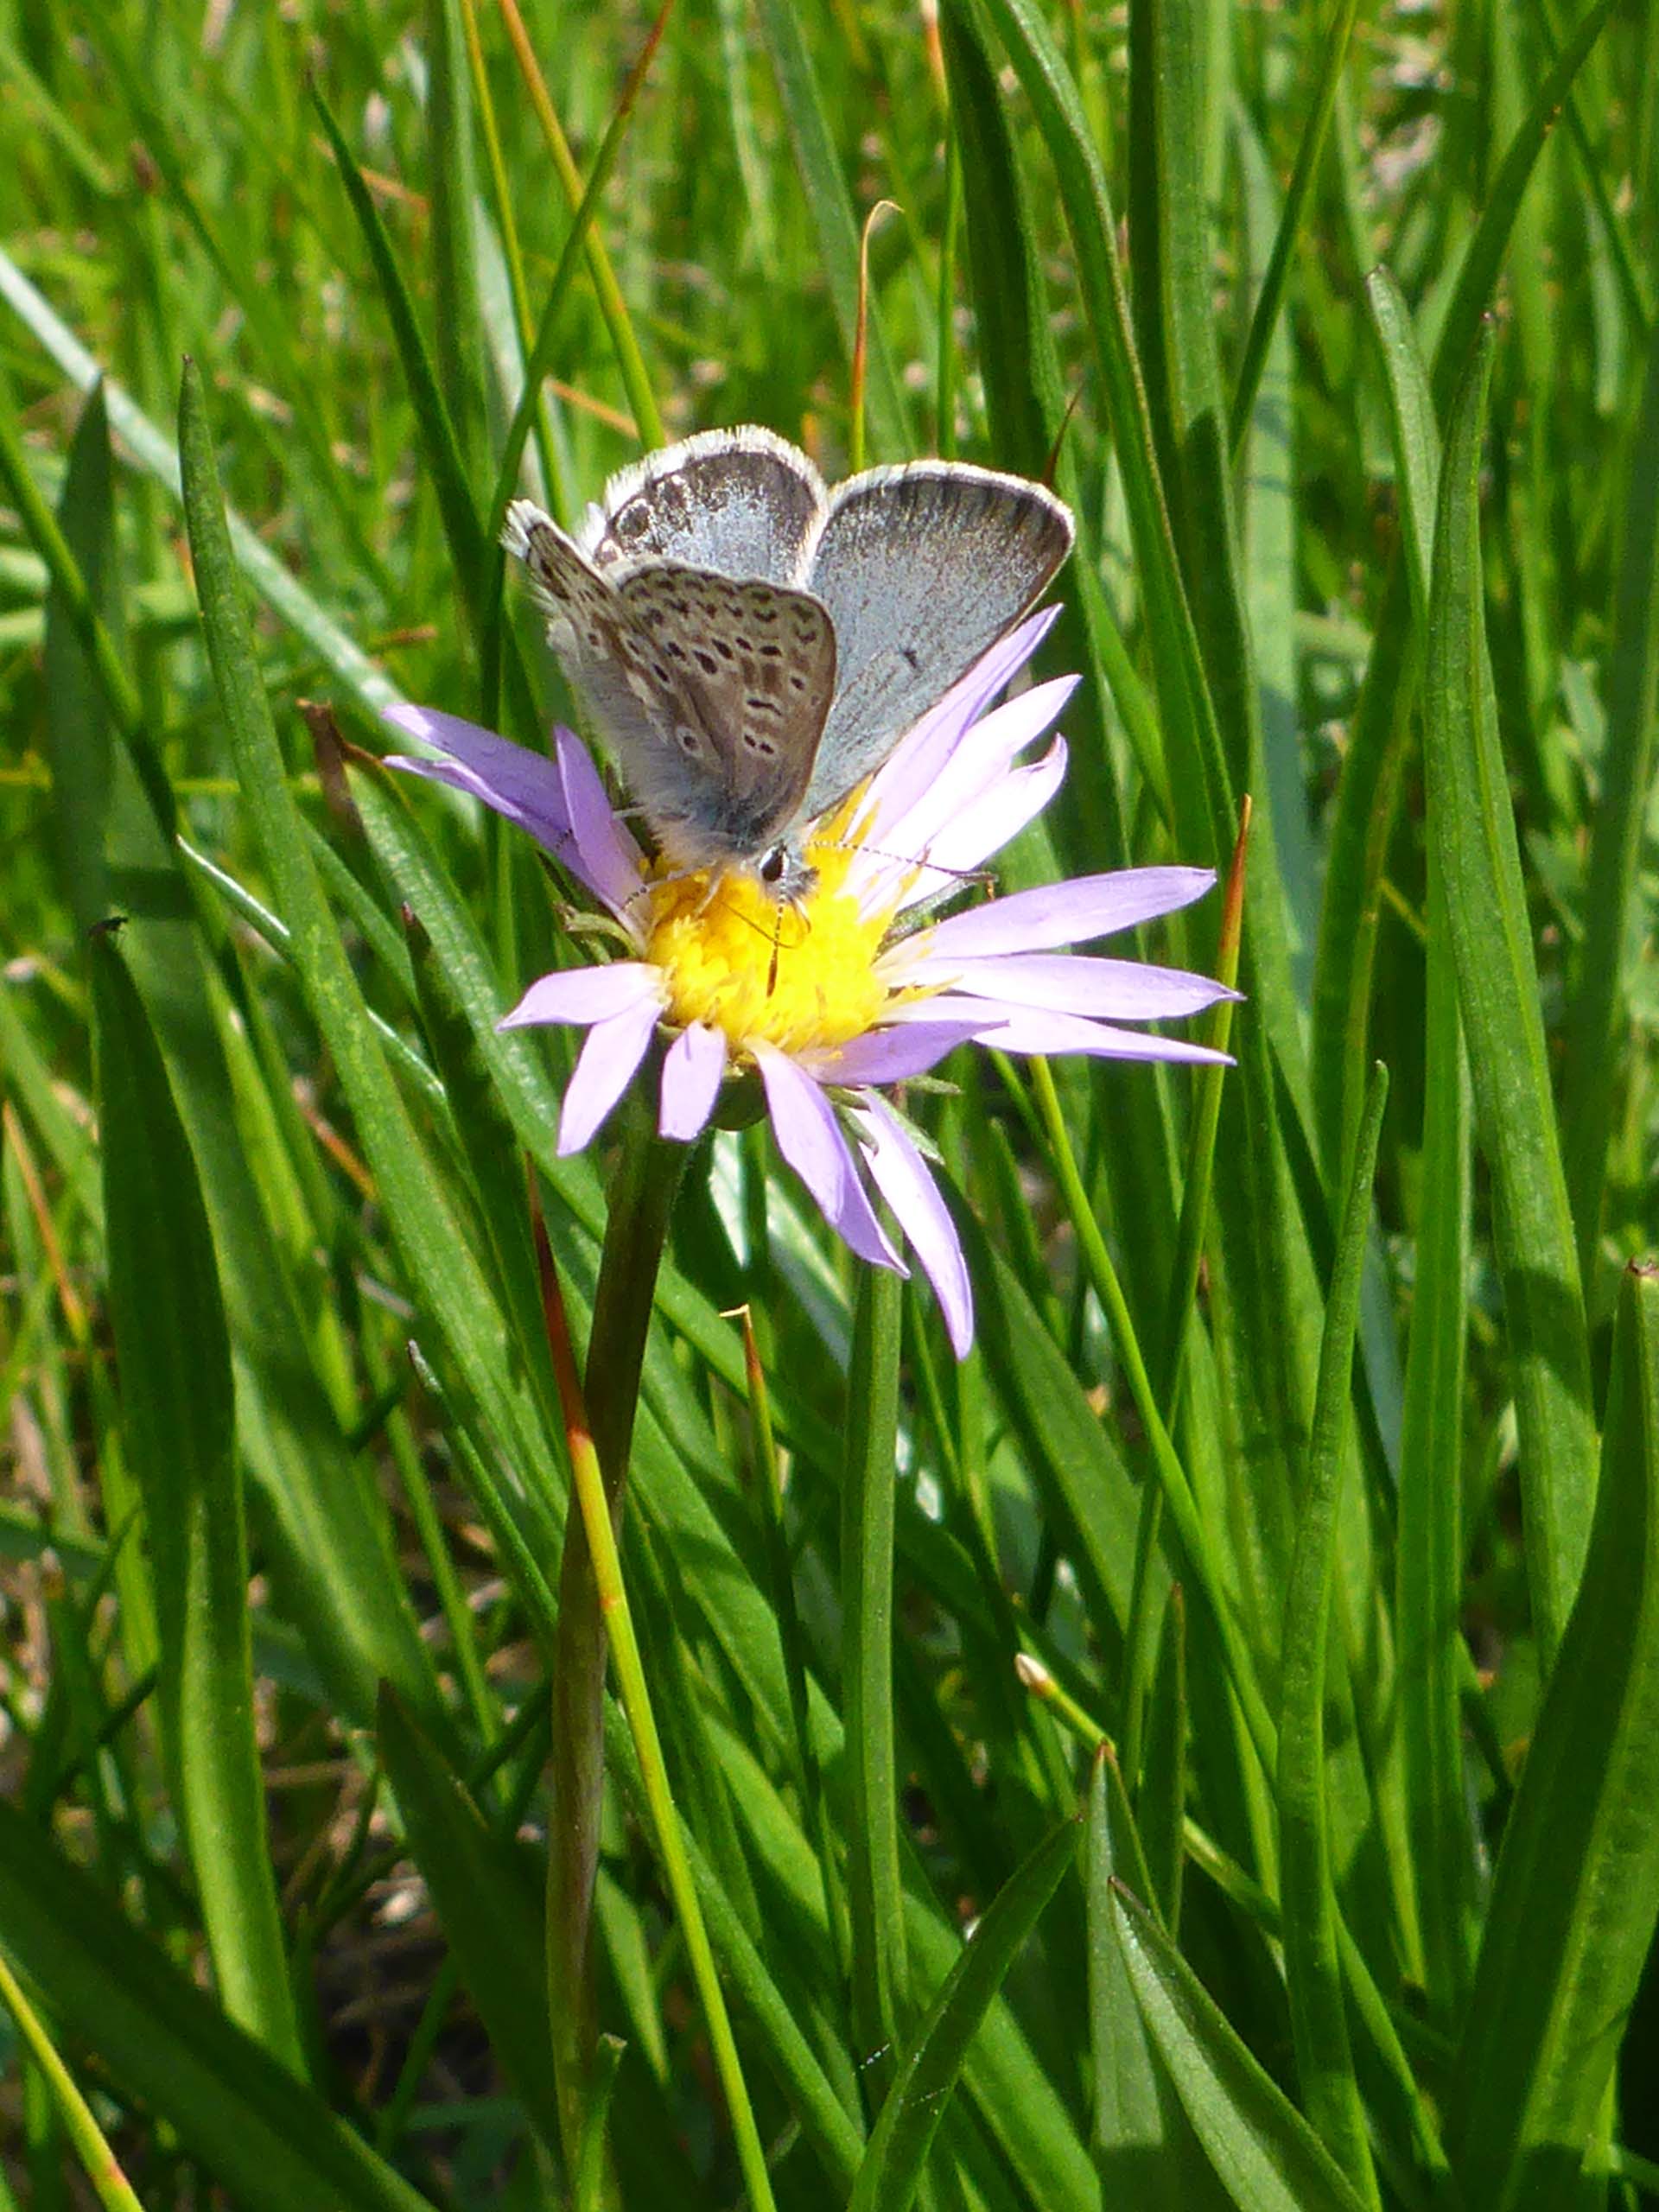 Tundra aster and butterfly at High Camp. D. Burk.